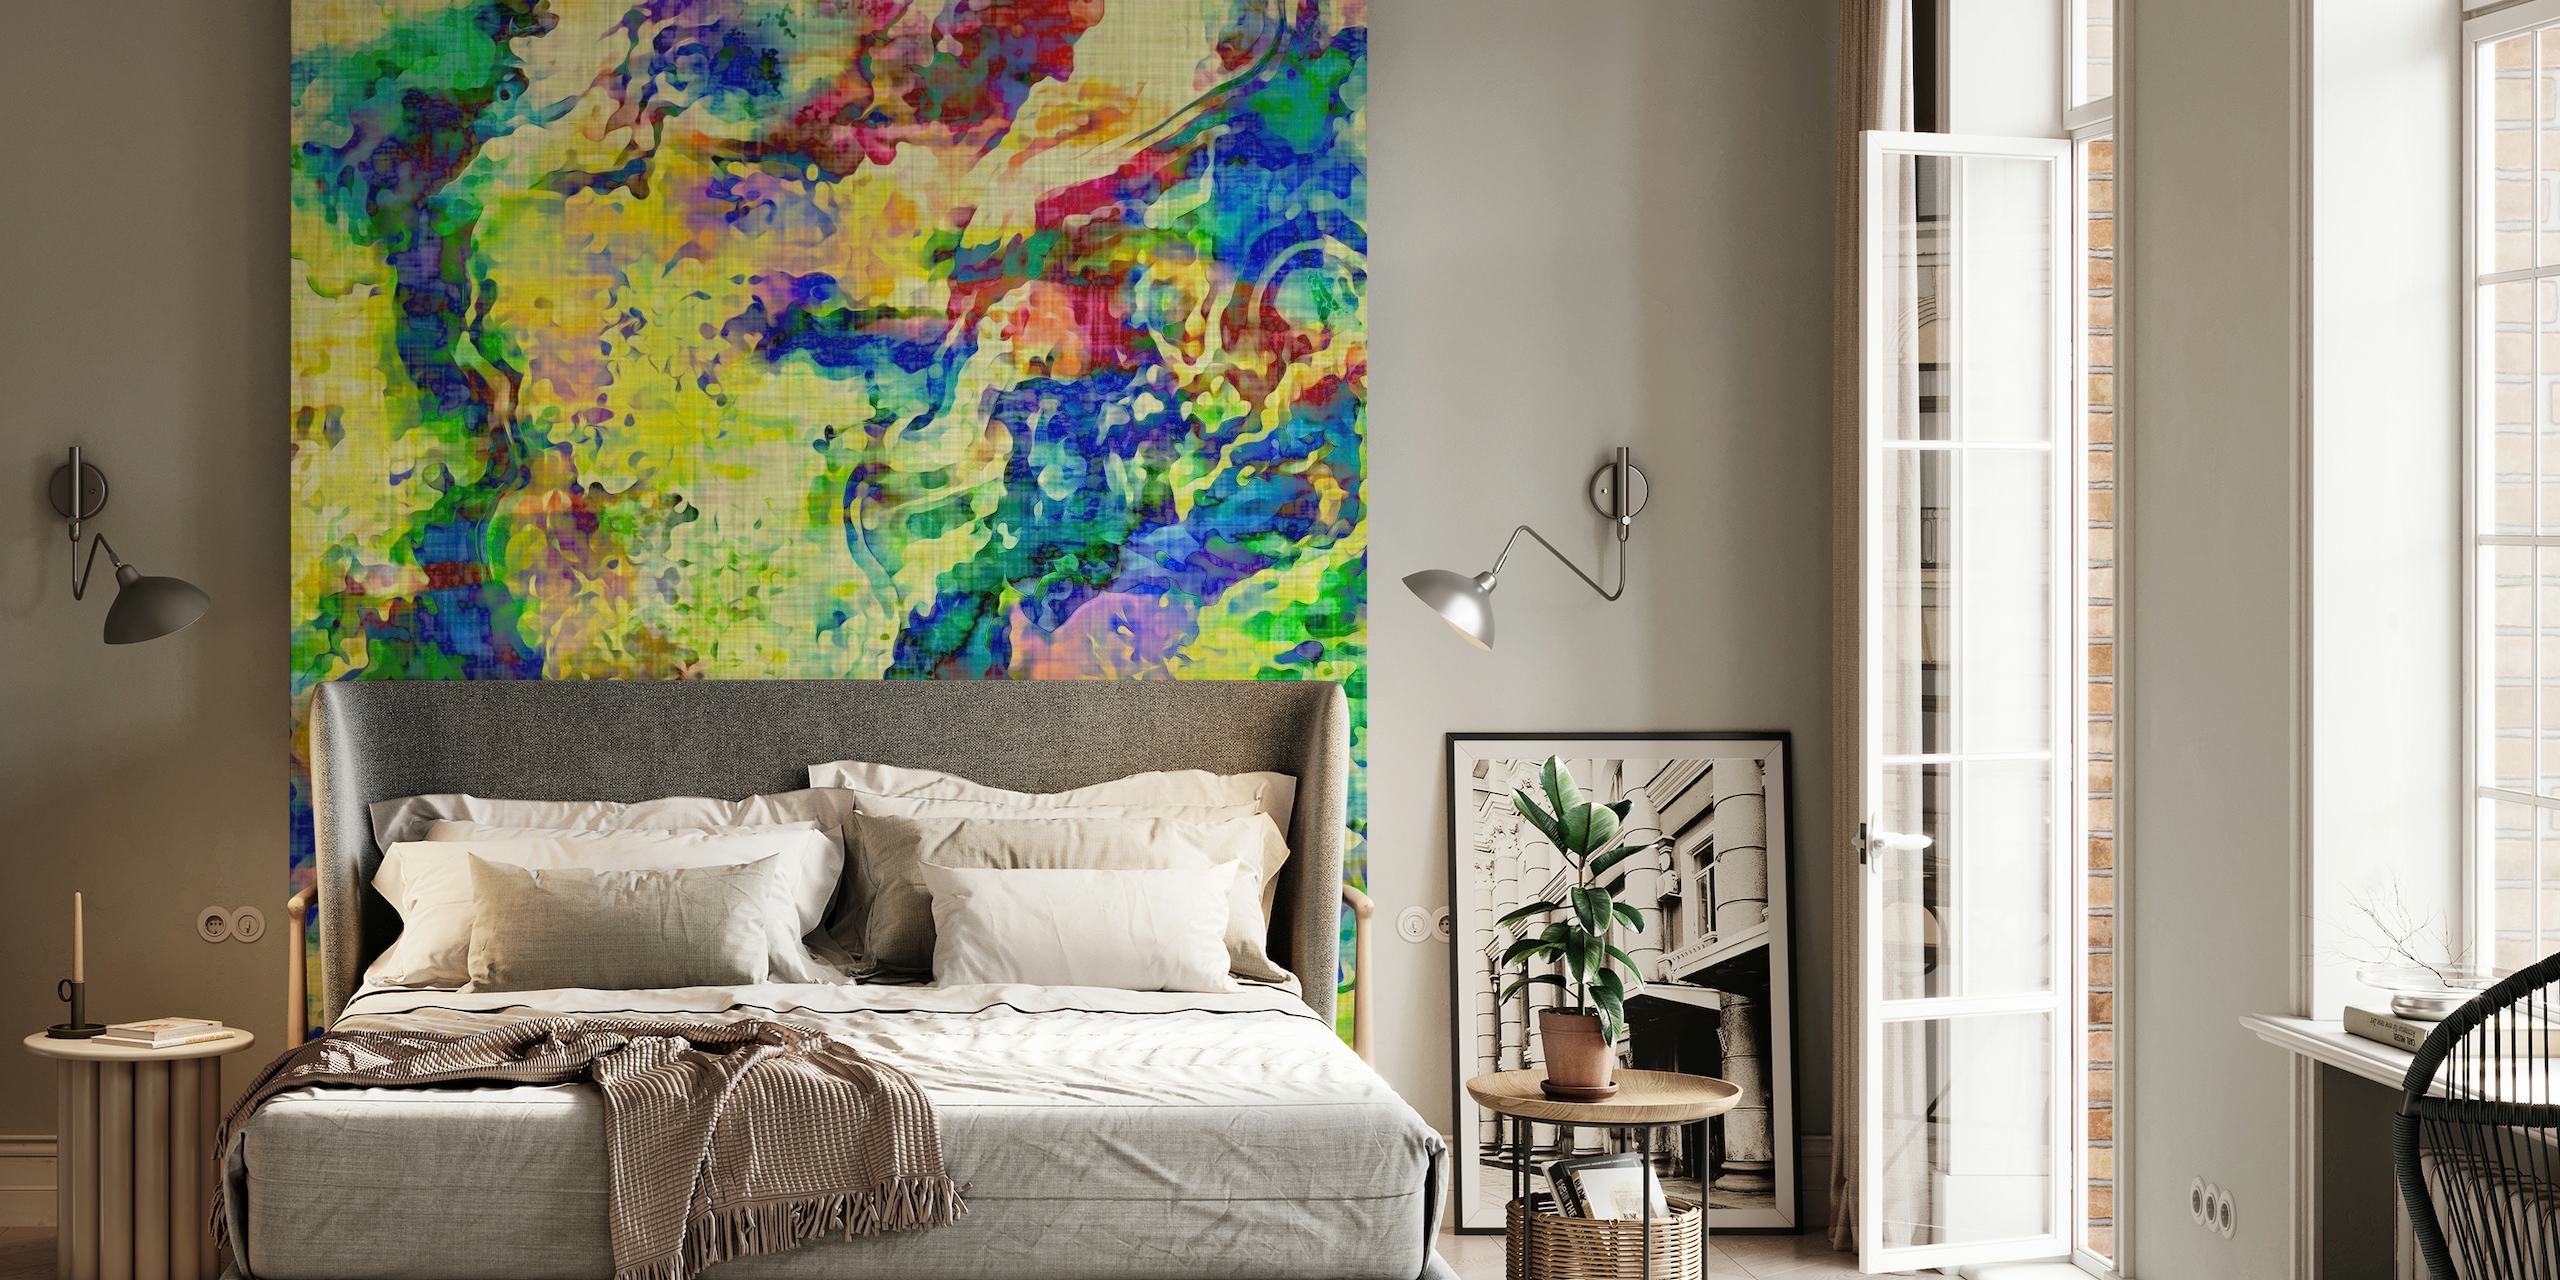 Abstract multicolored floral wall mural bringing artistic flair to your decor.